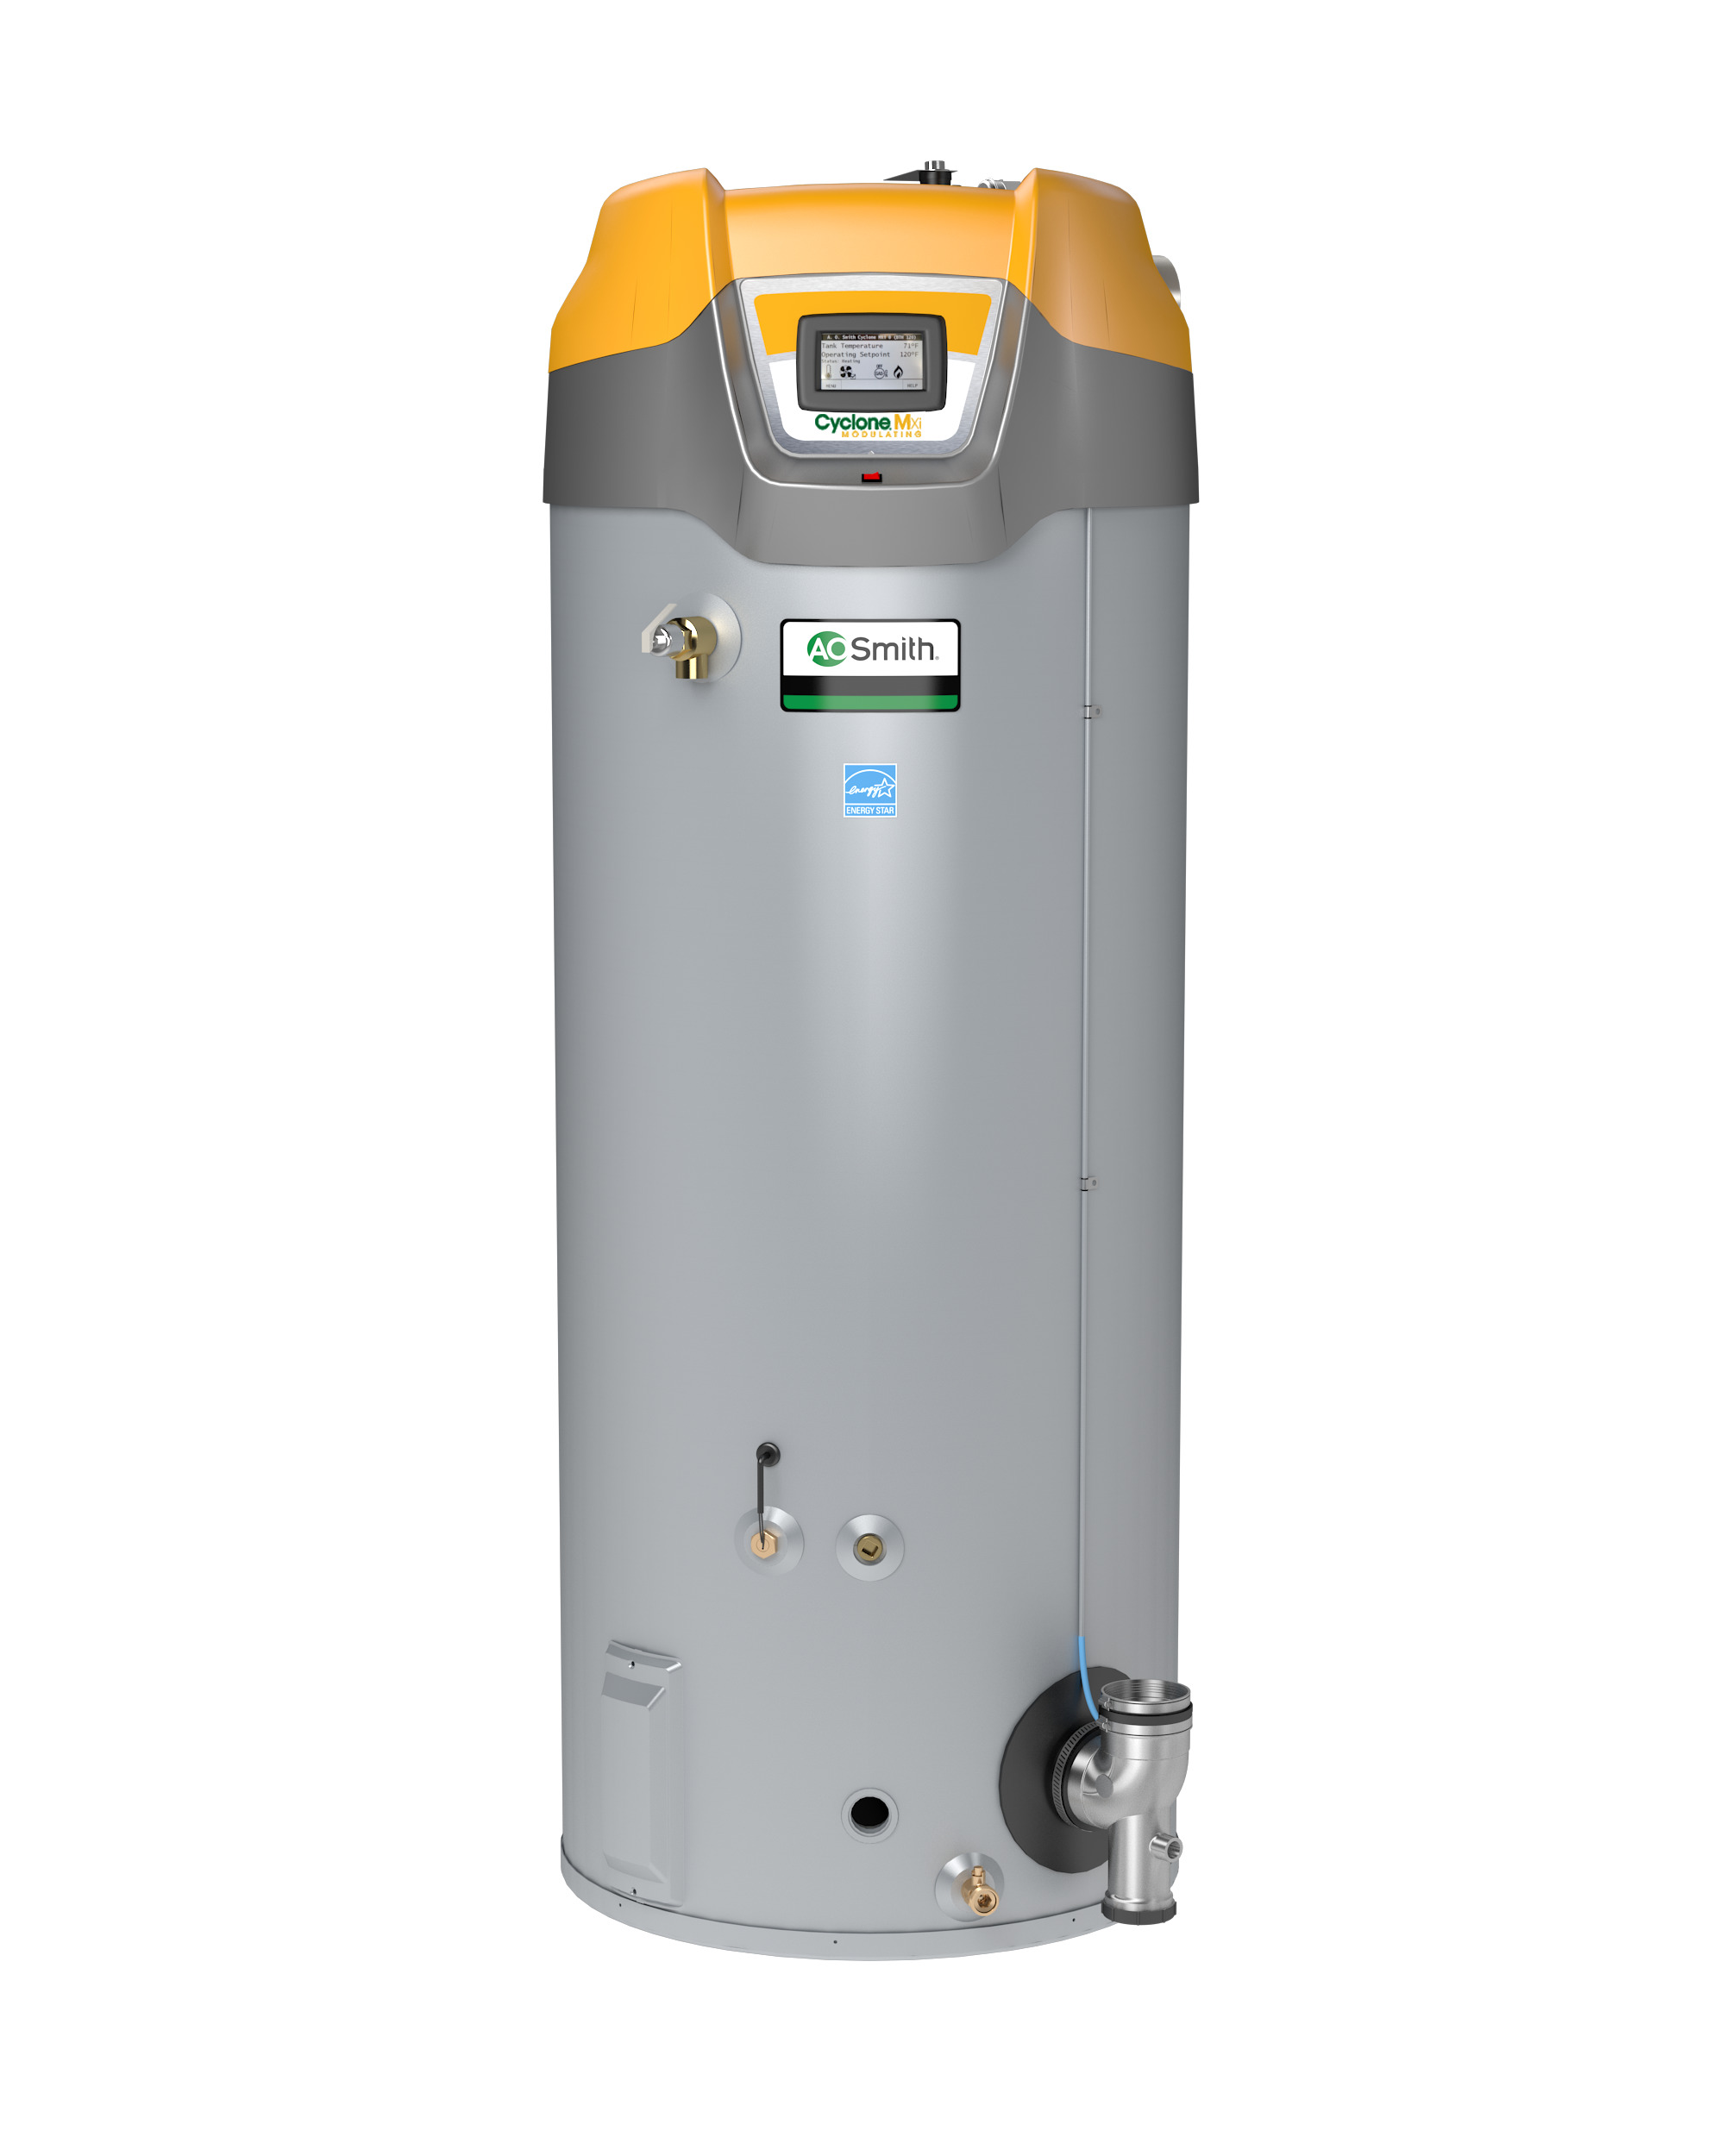 AO SMITH BTH-250A: 100 GALLON, 250,000 BTU, ASME, 3" VENT, UP TO 96% THERMAL EFFICIENCY, NATURAL GAS, CYCLONE Mxi MODULATING COMMERCIAL GAS WATER HEATER